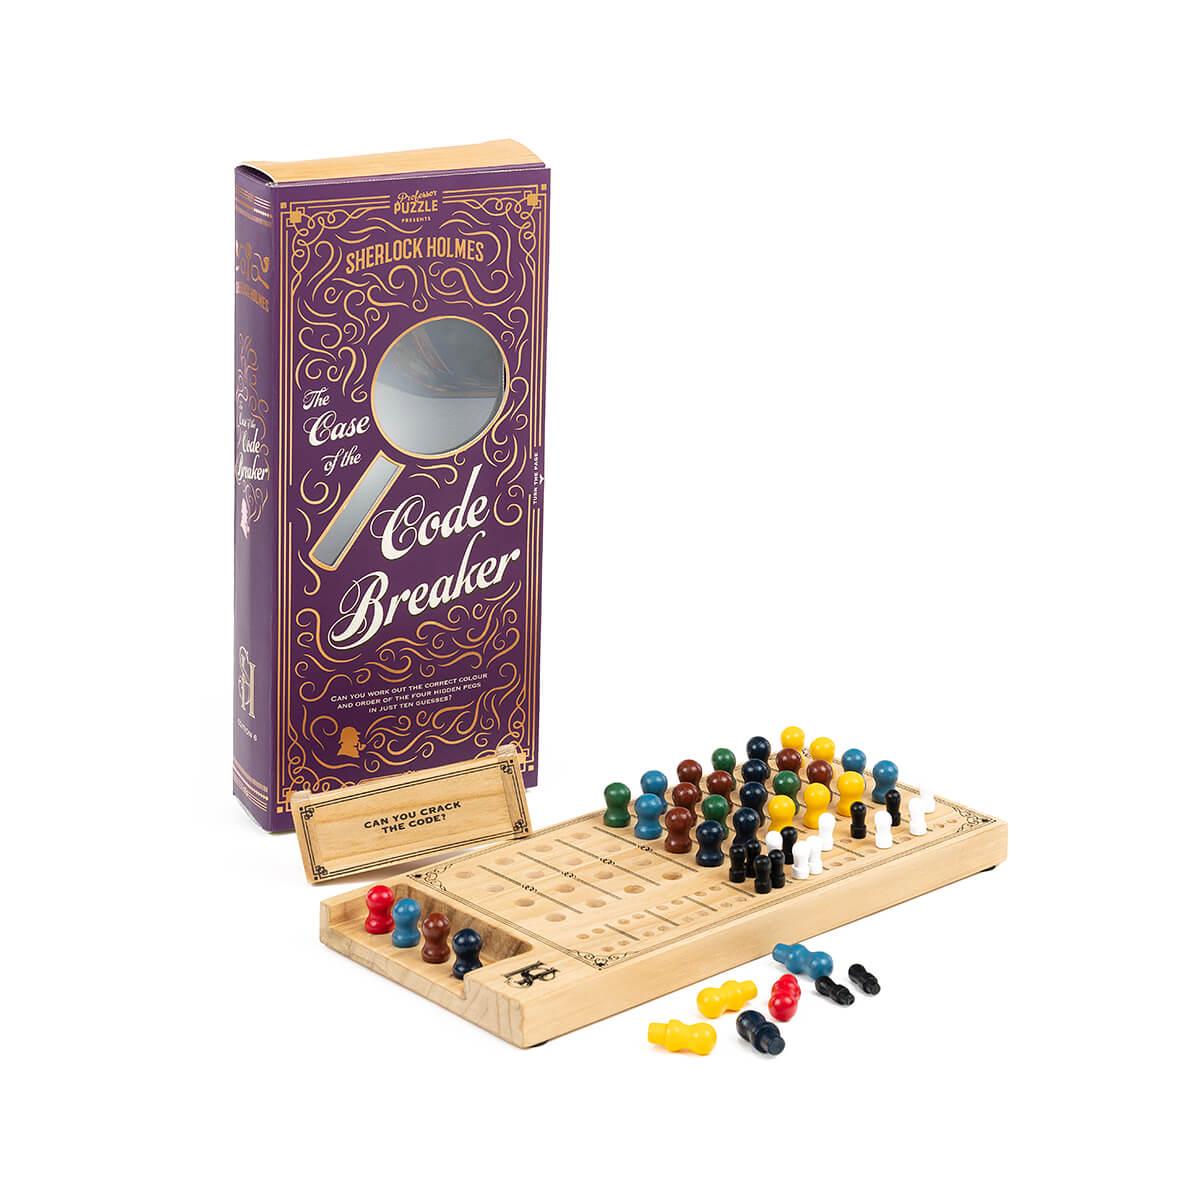  Sherlock Holmes The Case Of The Code Breaker Puzzle